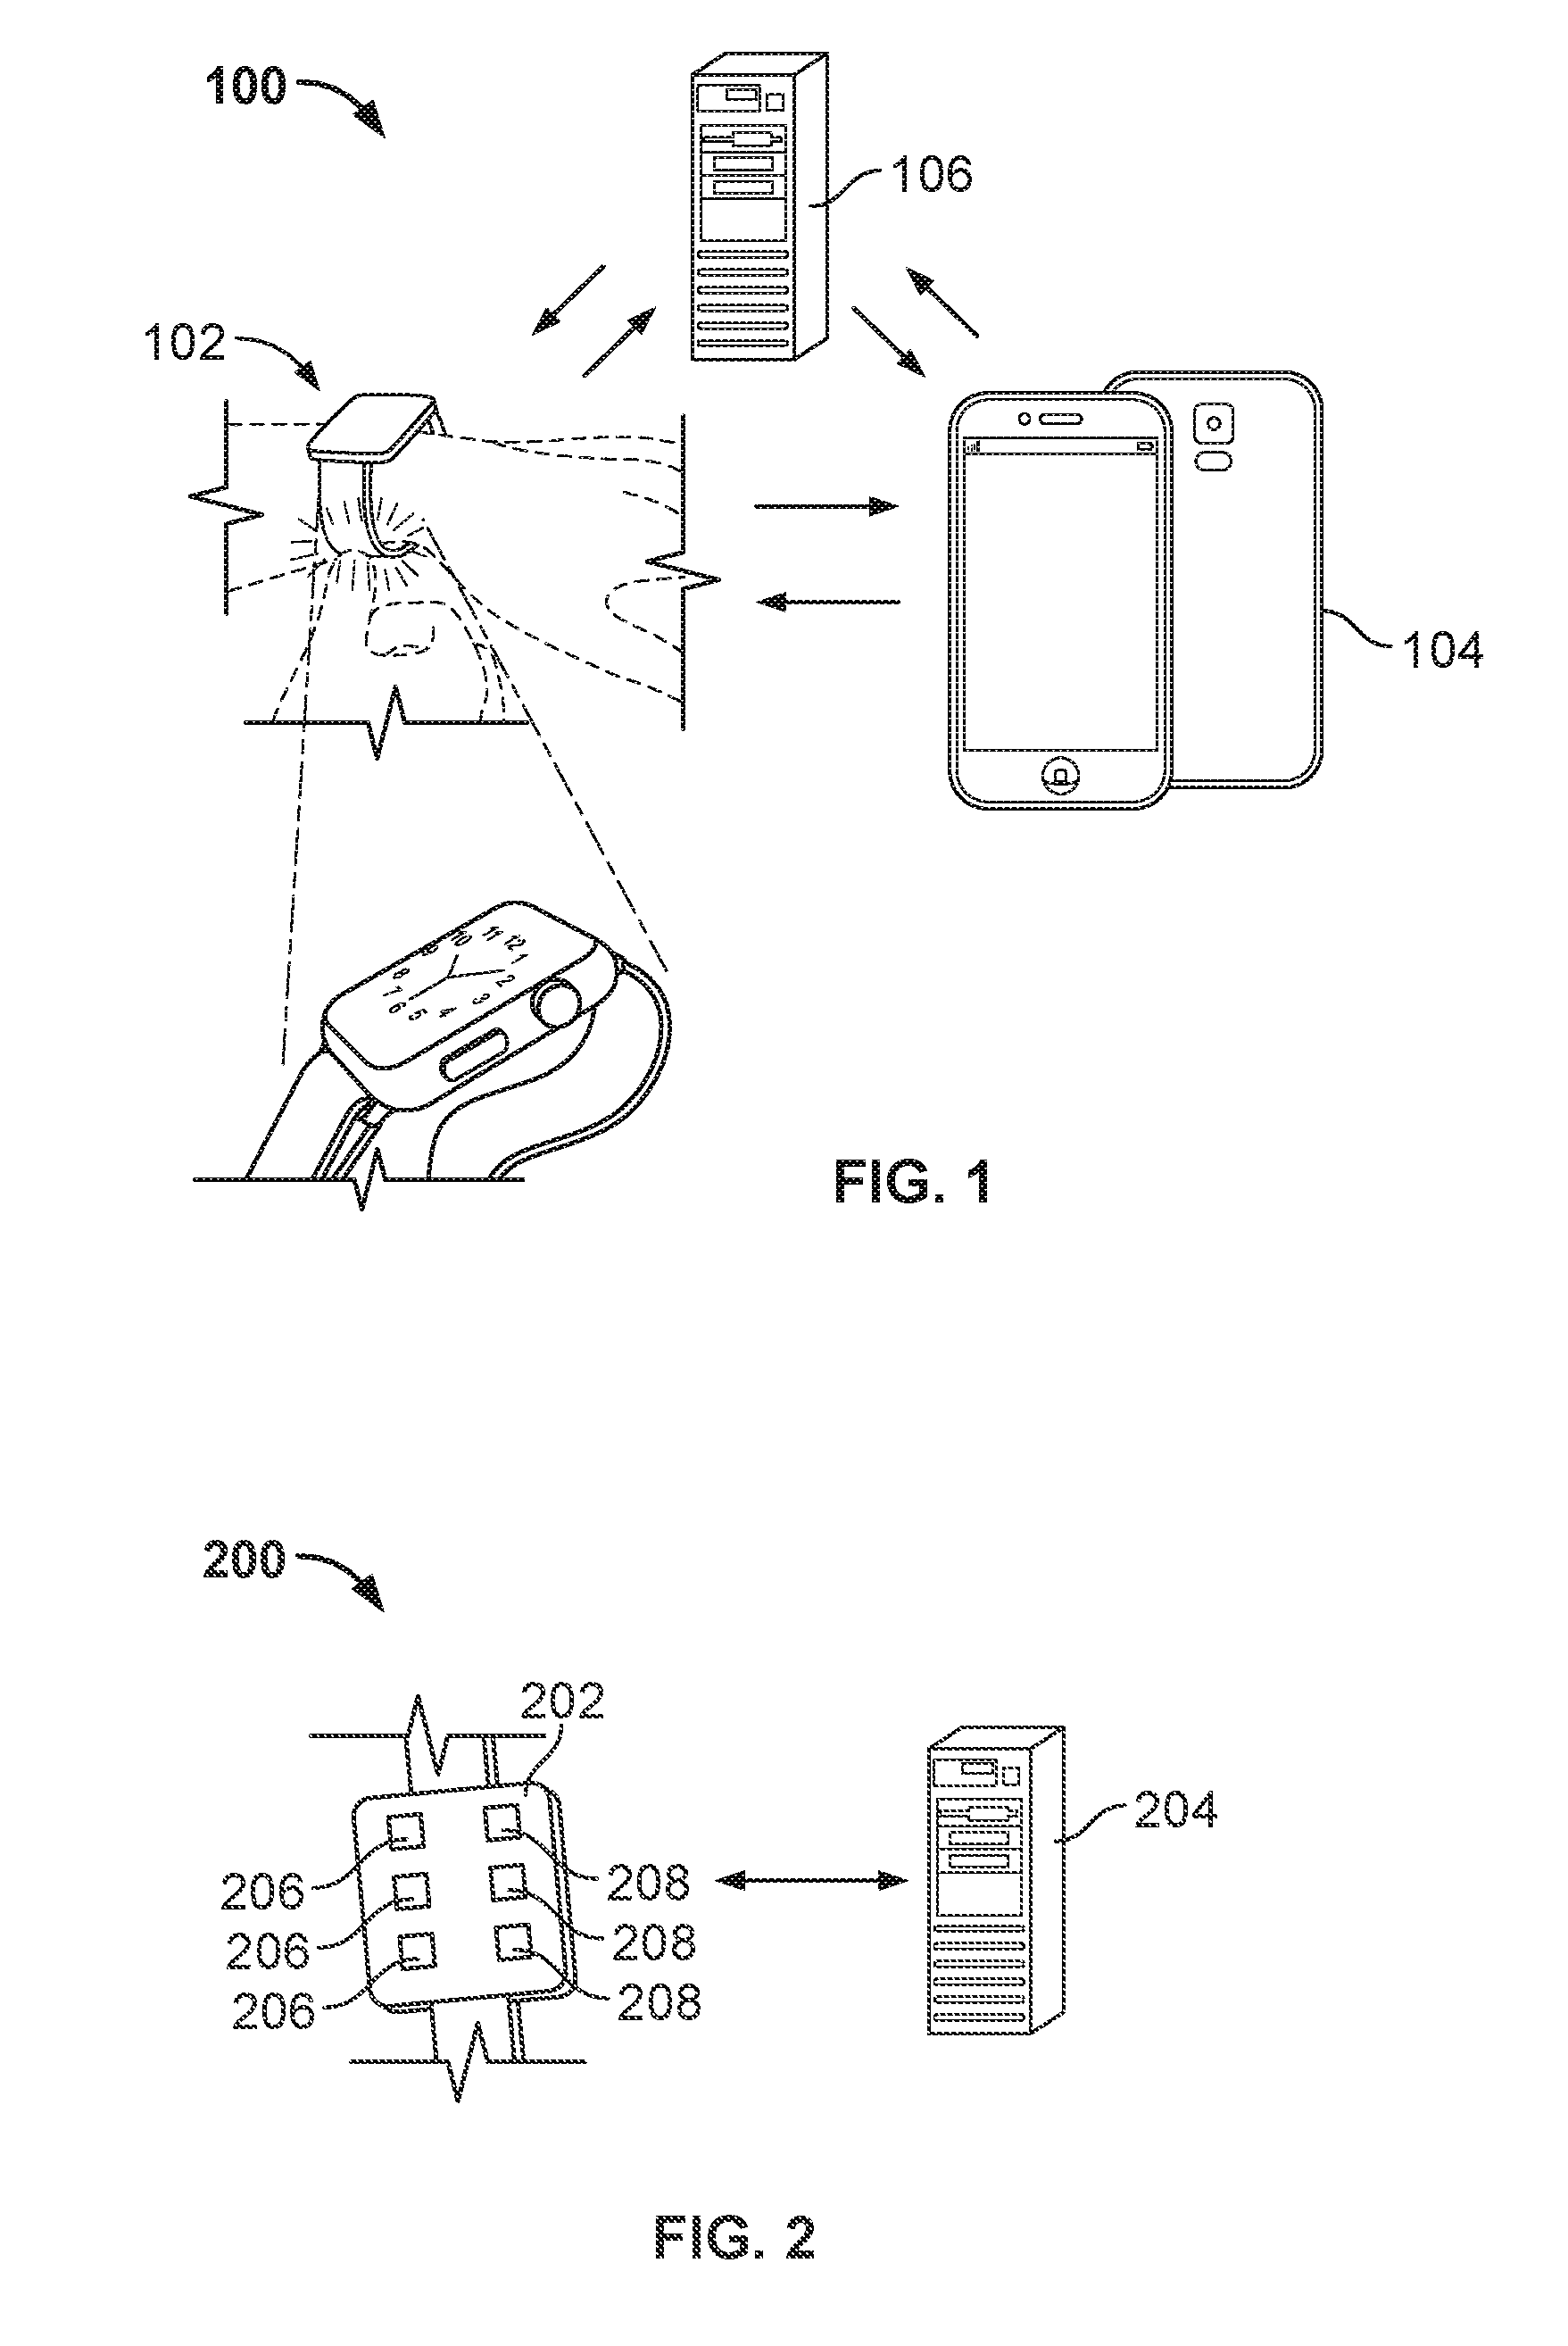 Systems and methods for quantification of, and prediction of smoking behavior